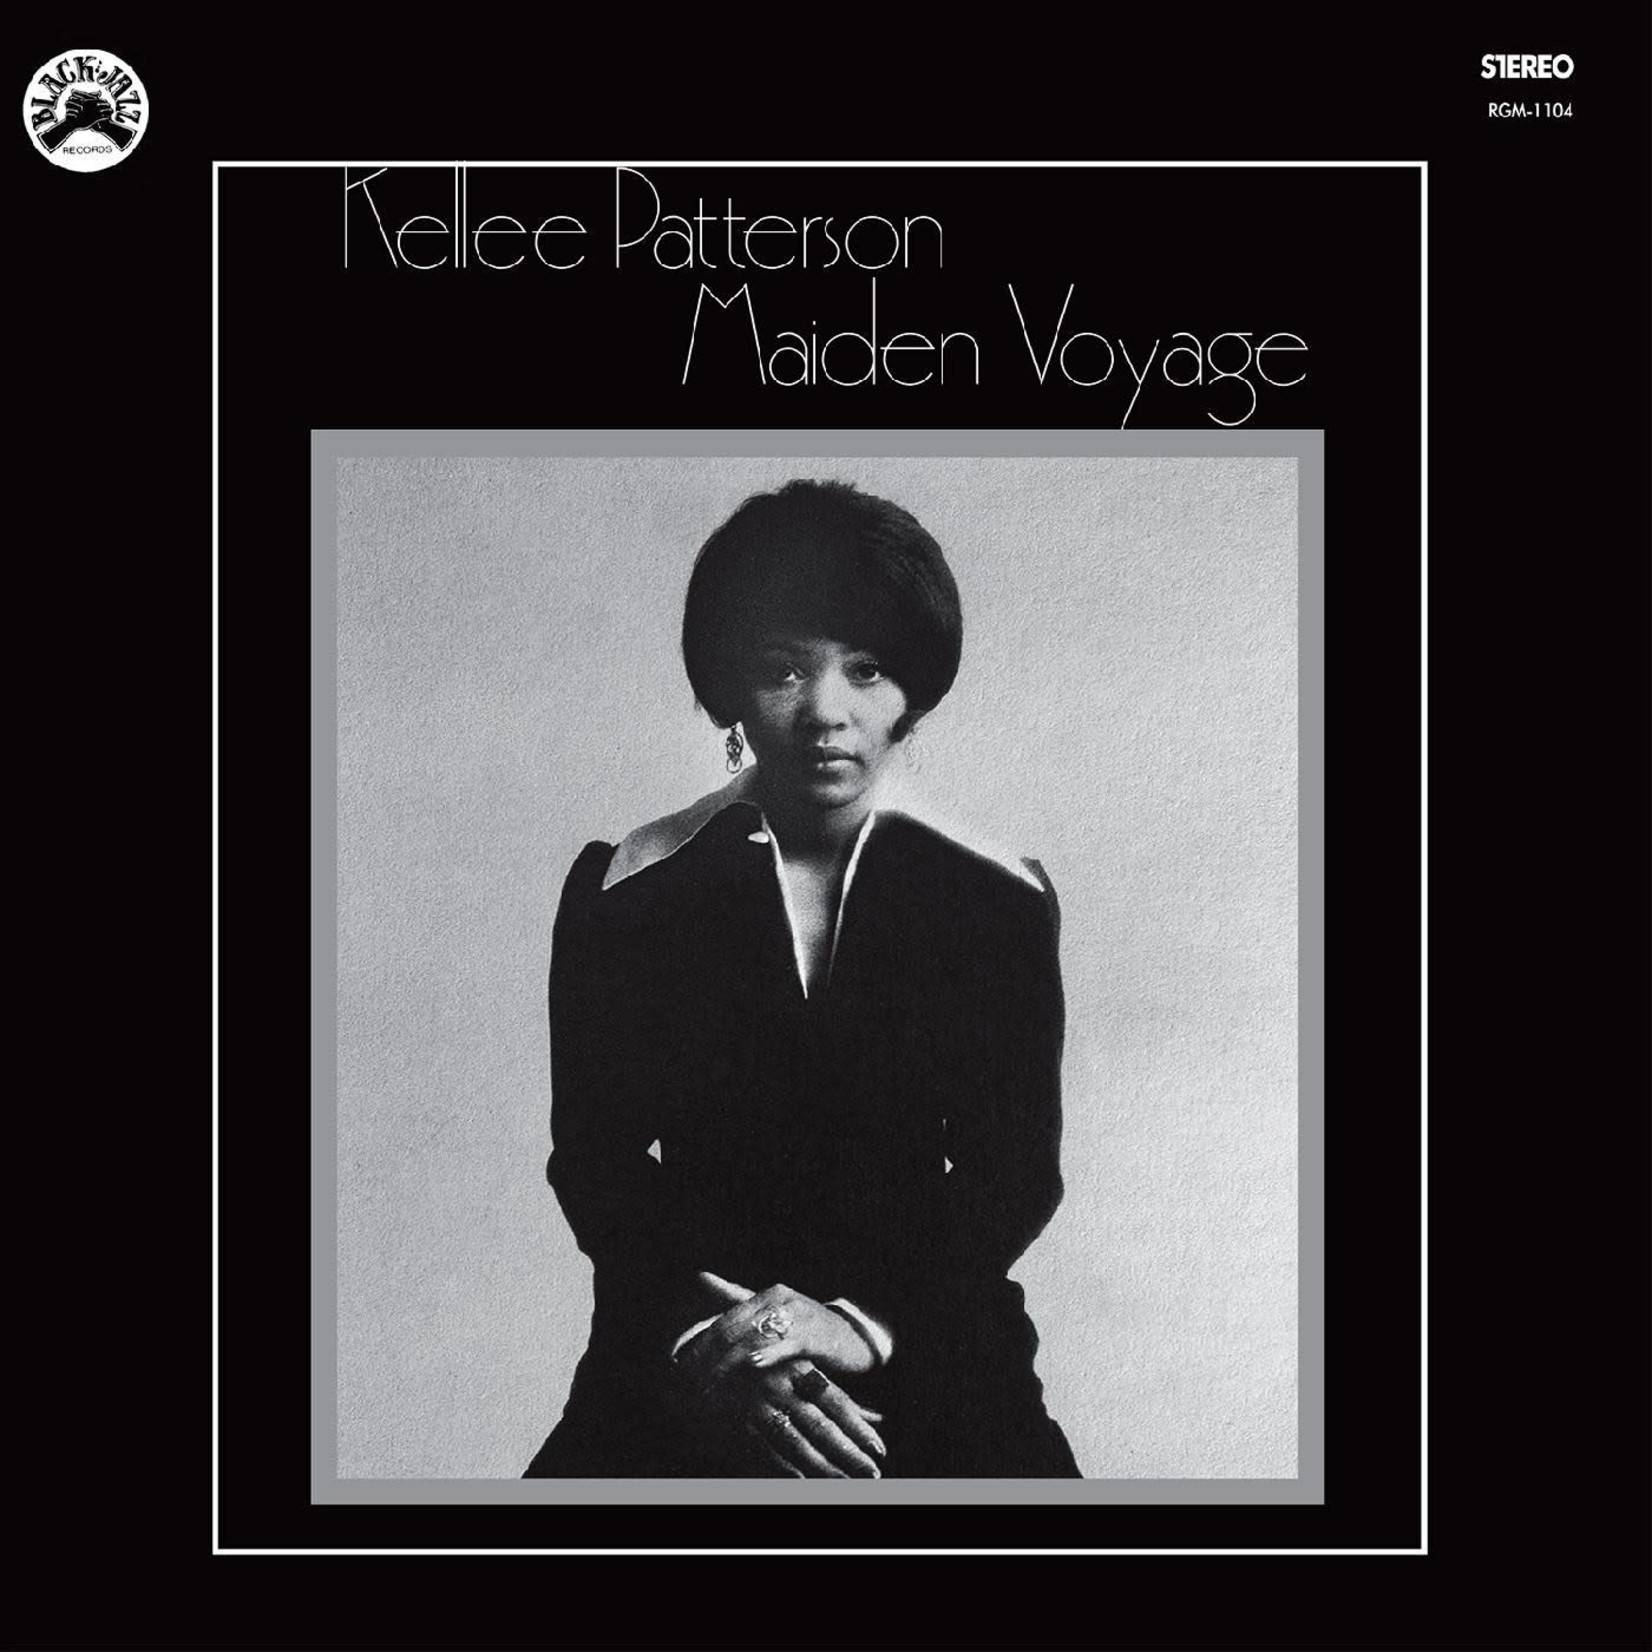 [New] Patterson, Kellee: Maiden Voyage (remastered vinyl edition) [REAL GONE MUSIC]